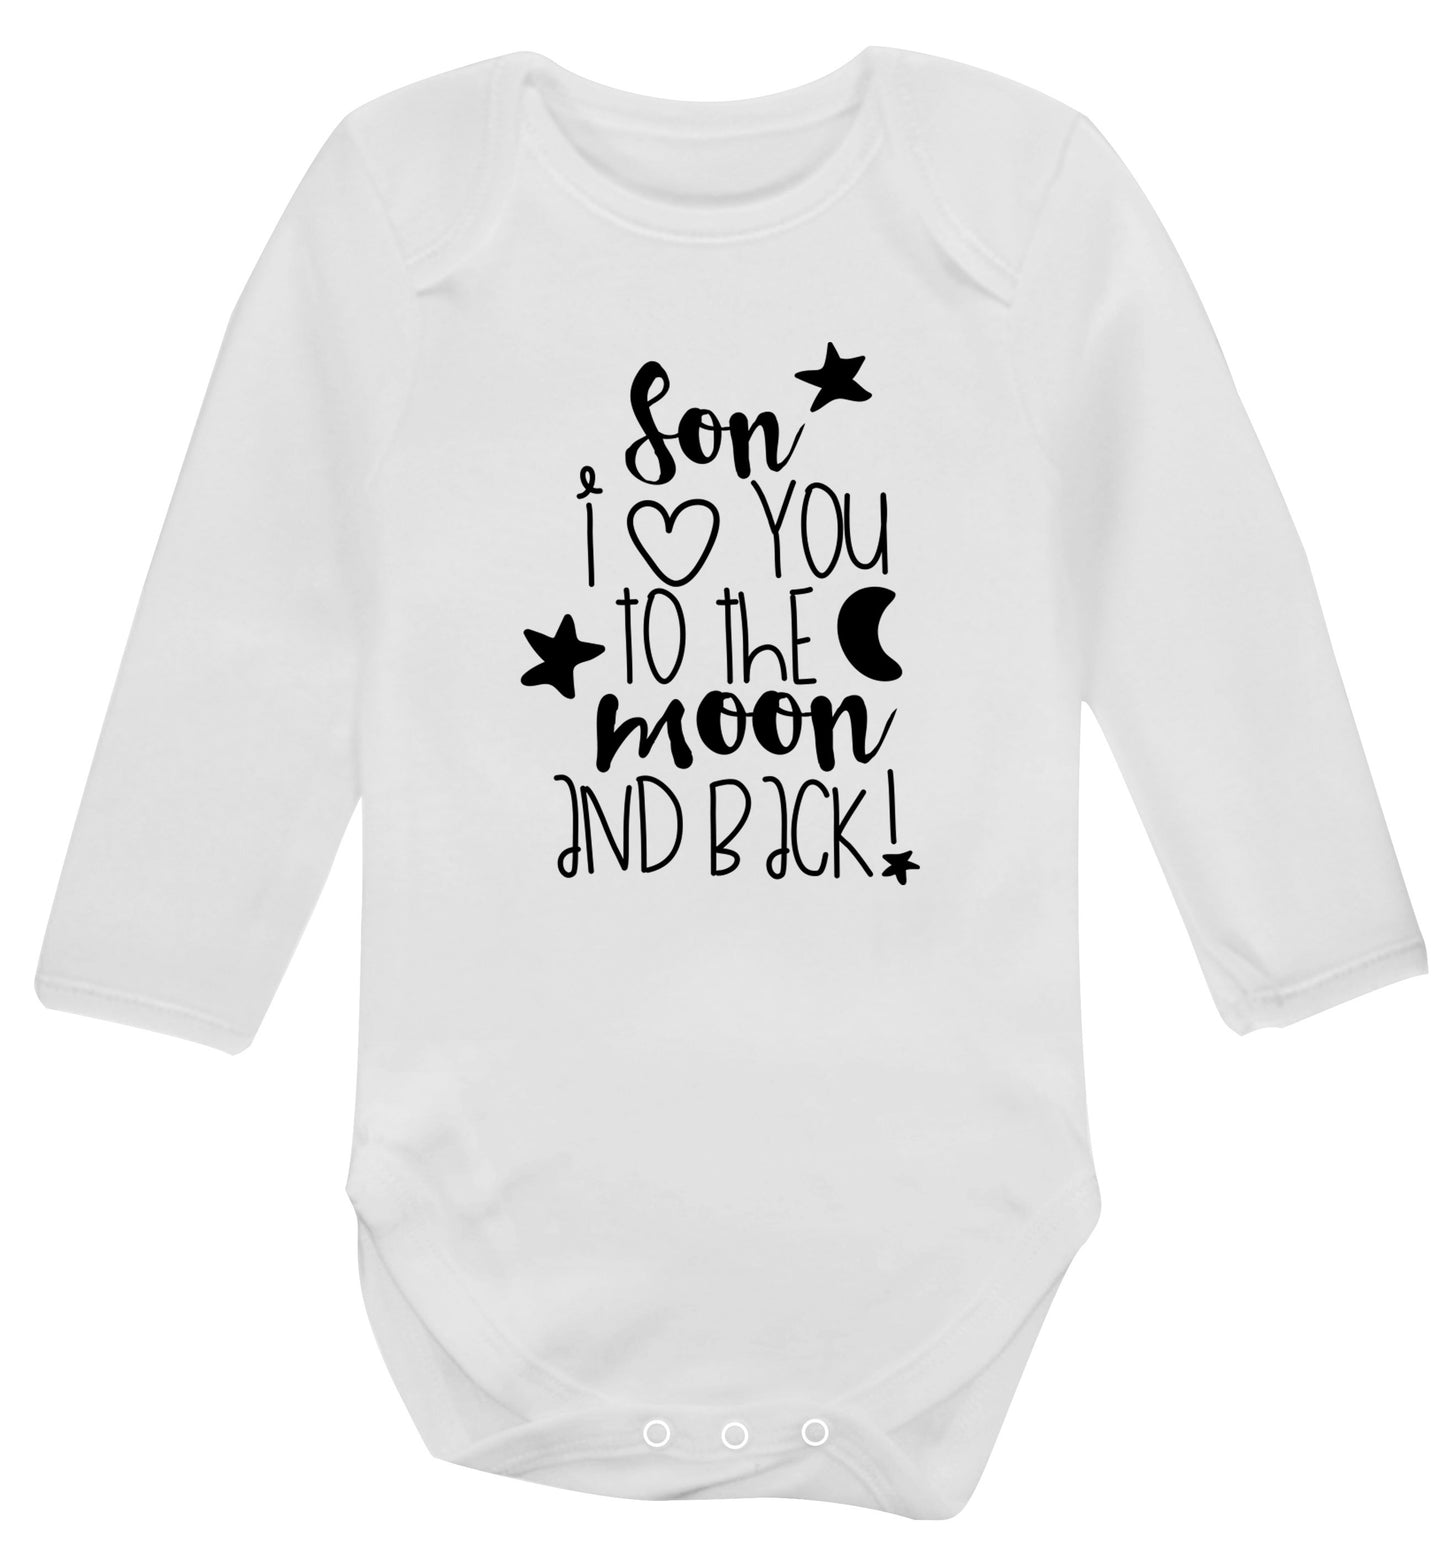 Son I love you to the moon and back Baby Vest long sleeved white 6-12 months